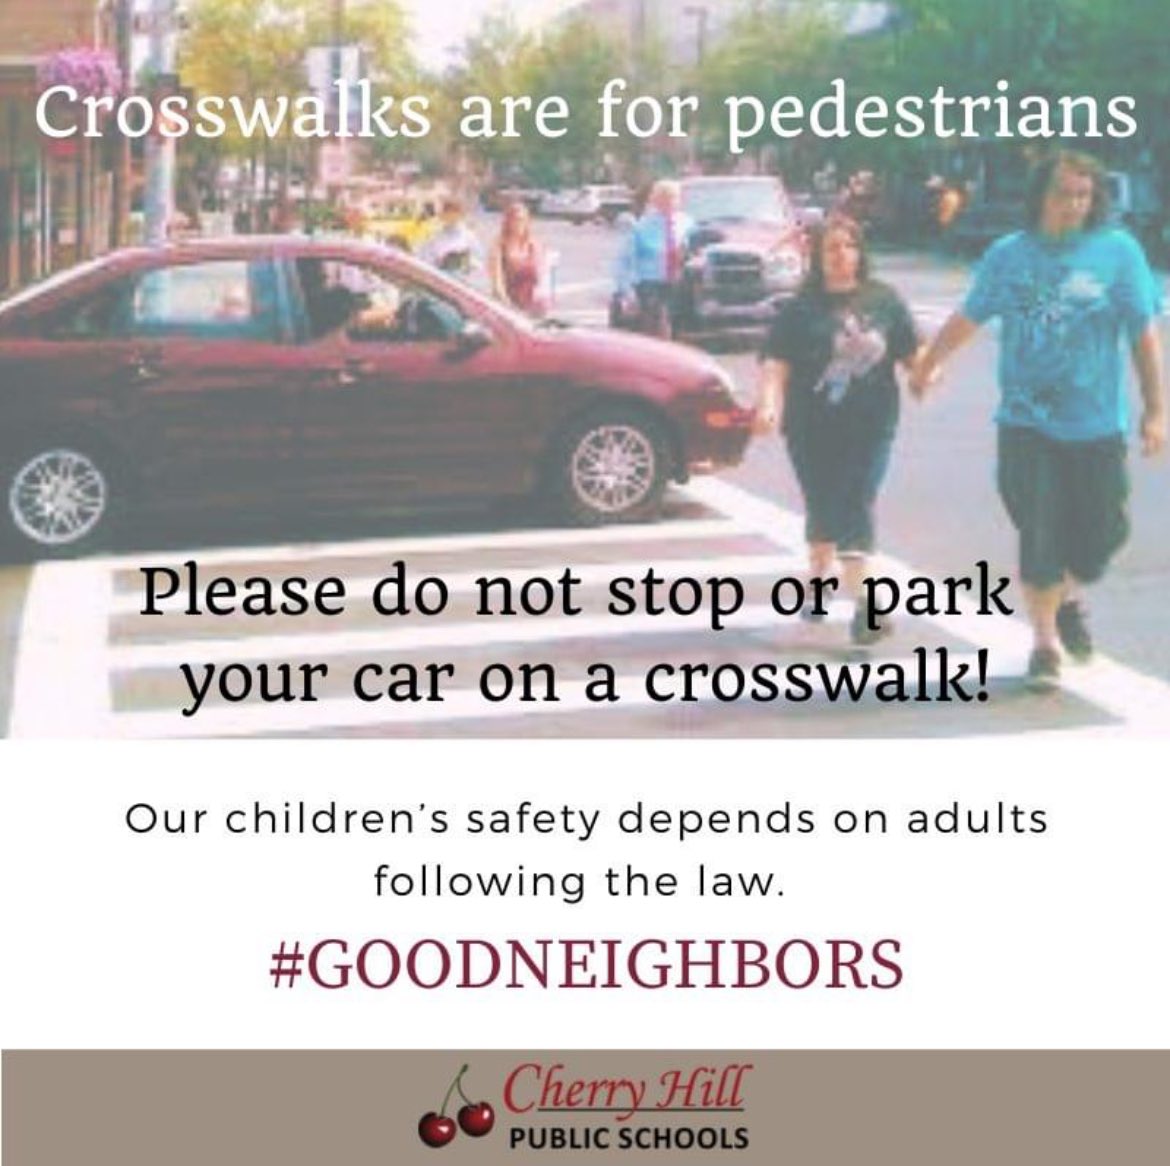 IMPORTANT REMINDER: Crosswalks are for pedestrians. Please do not stop or park on crosswalks! The safety of our students depends on adults following the law. #WEareCHPS #GoodNeighbors